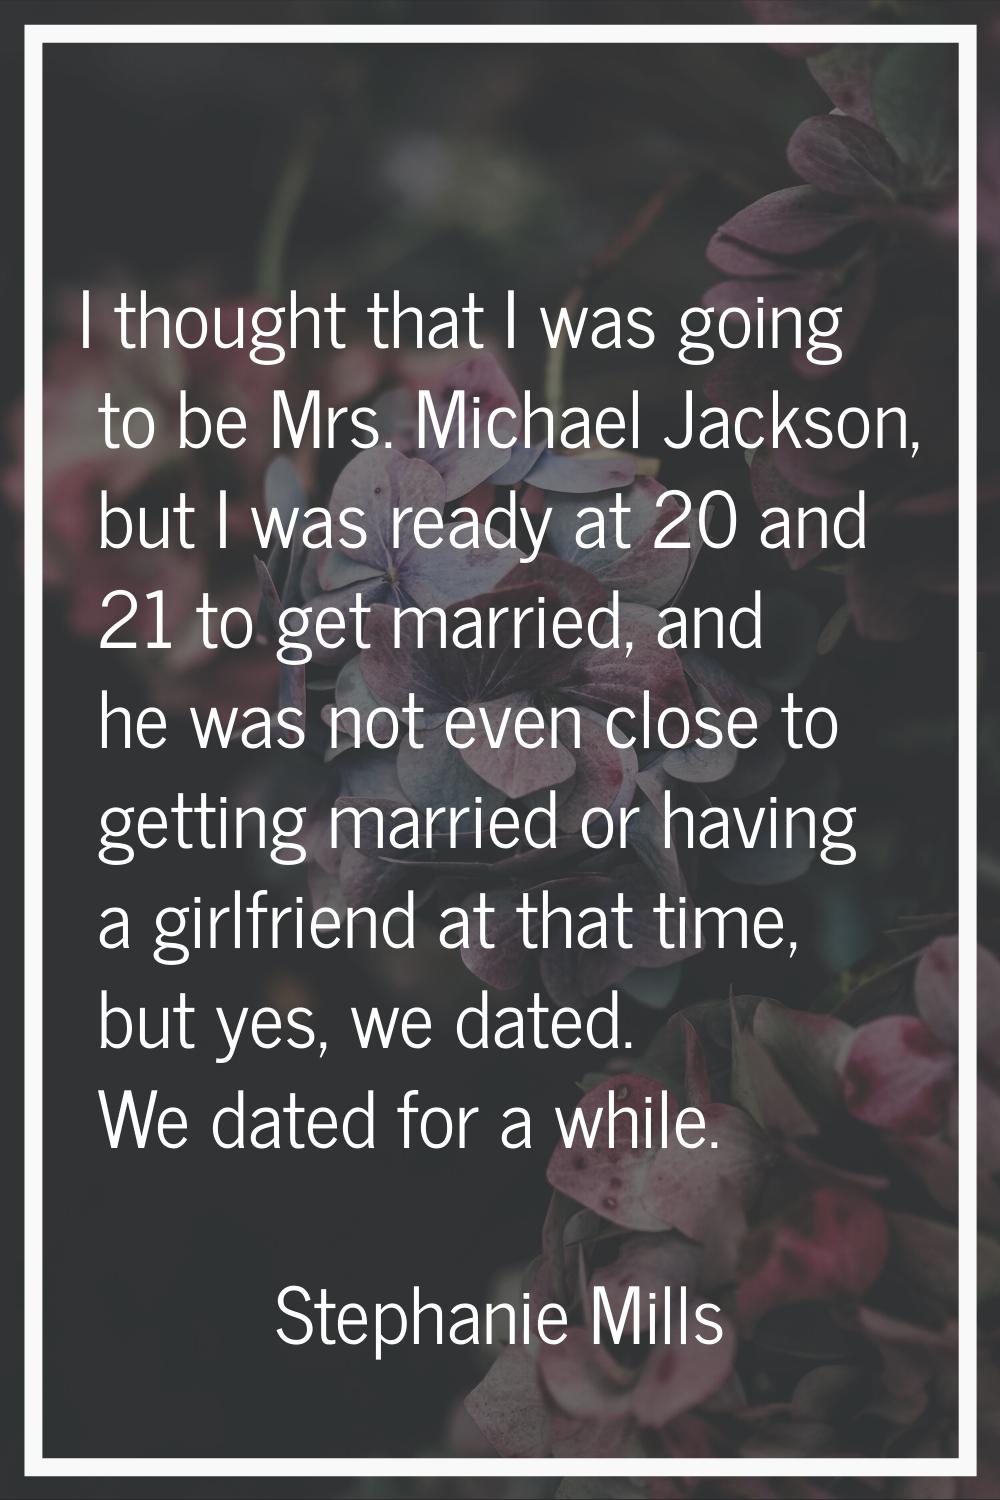 I thought that I was going to be Mrs. Michael Jackson, but I was ready at 20 and 21 to get married,